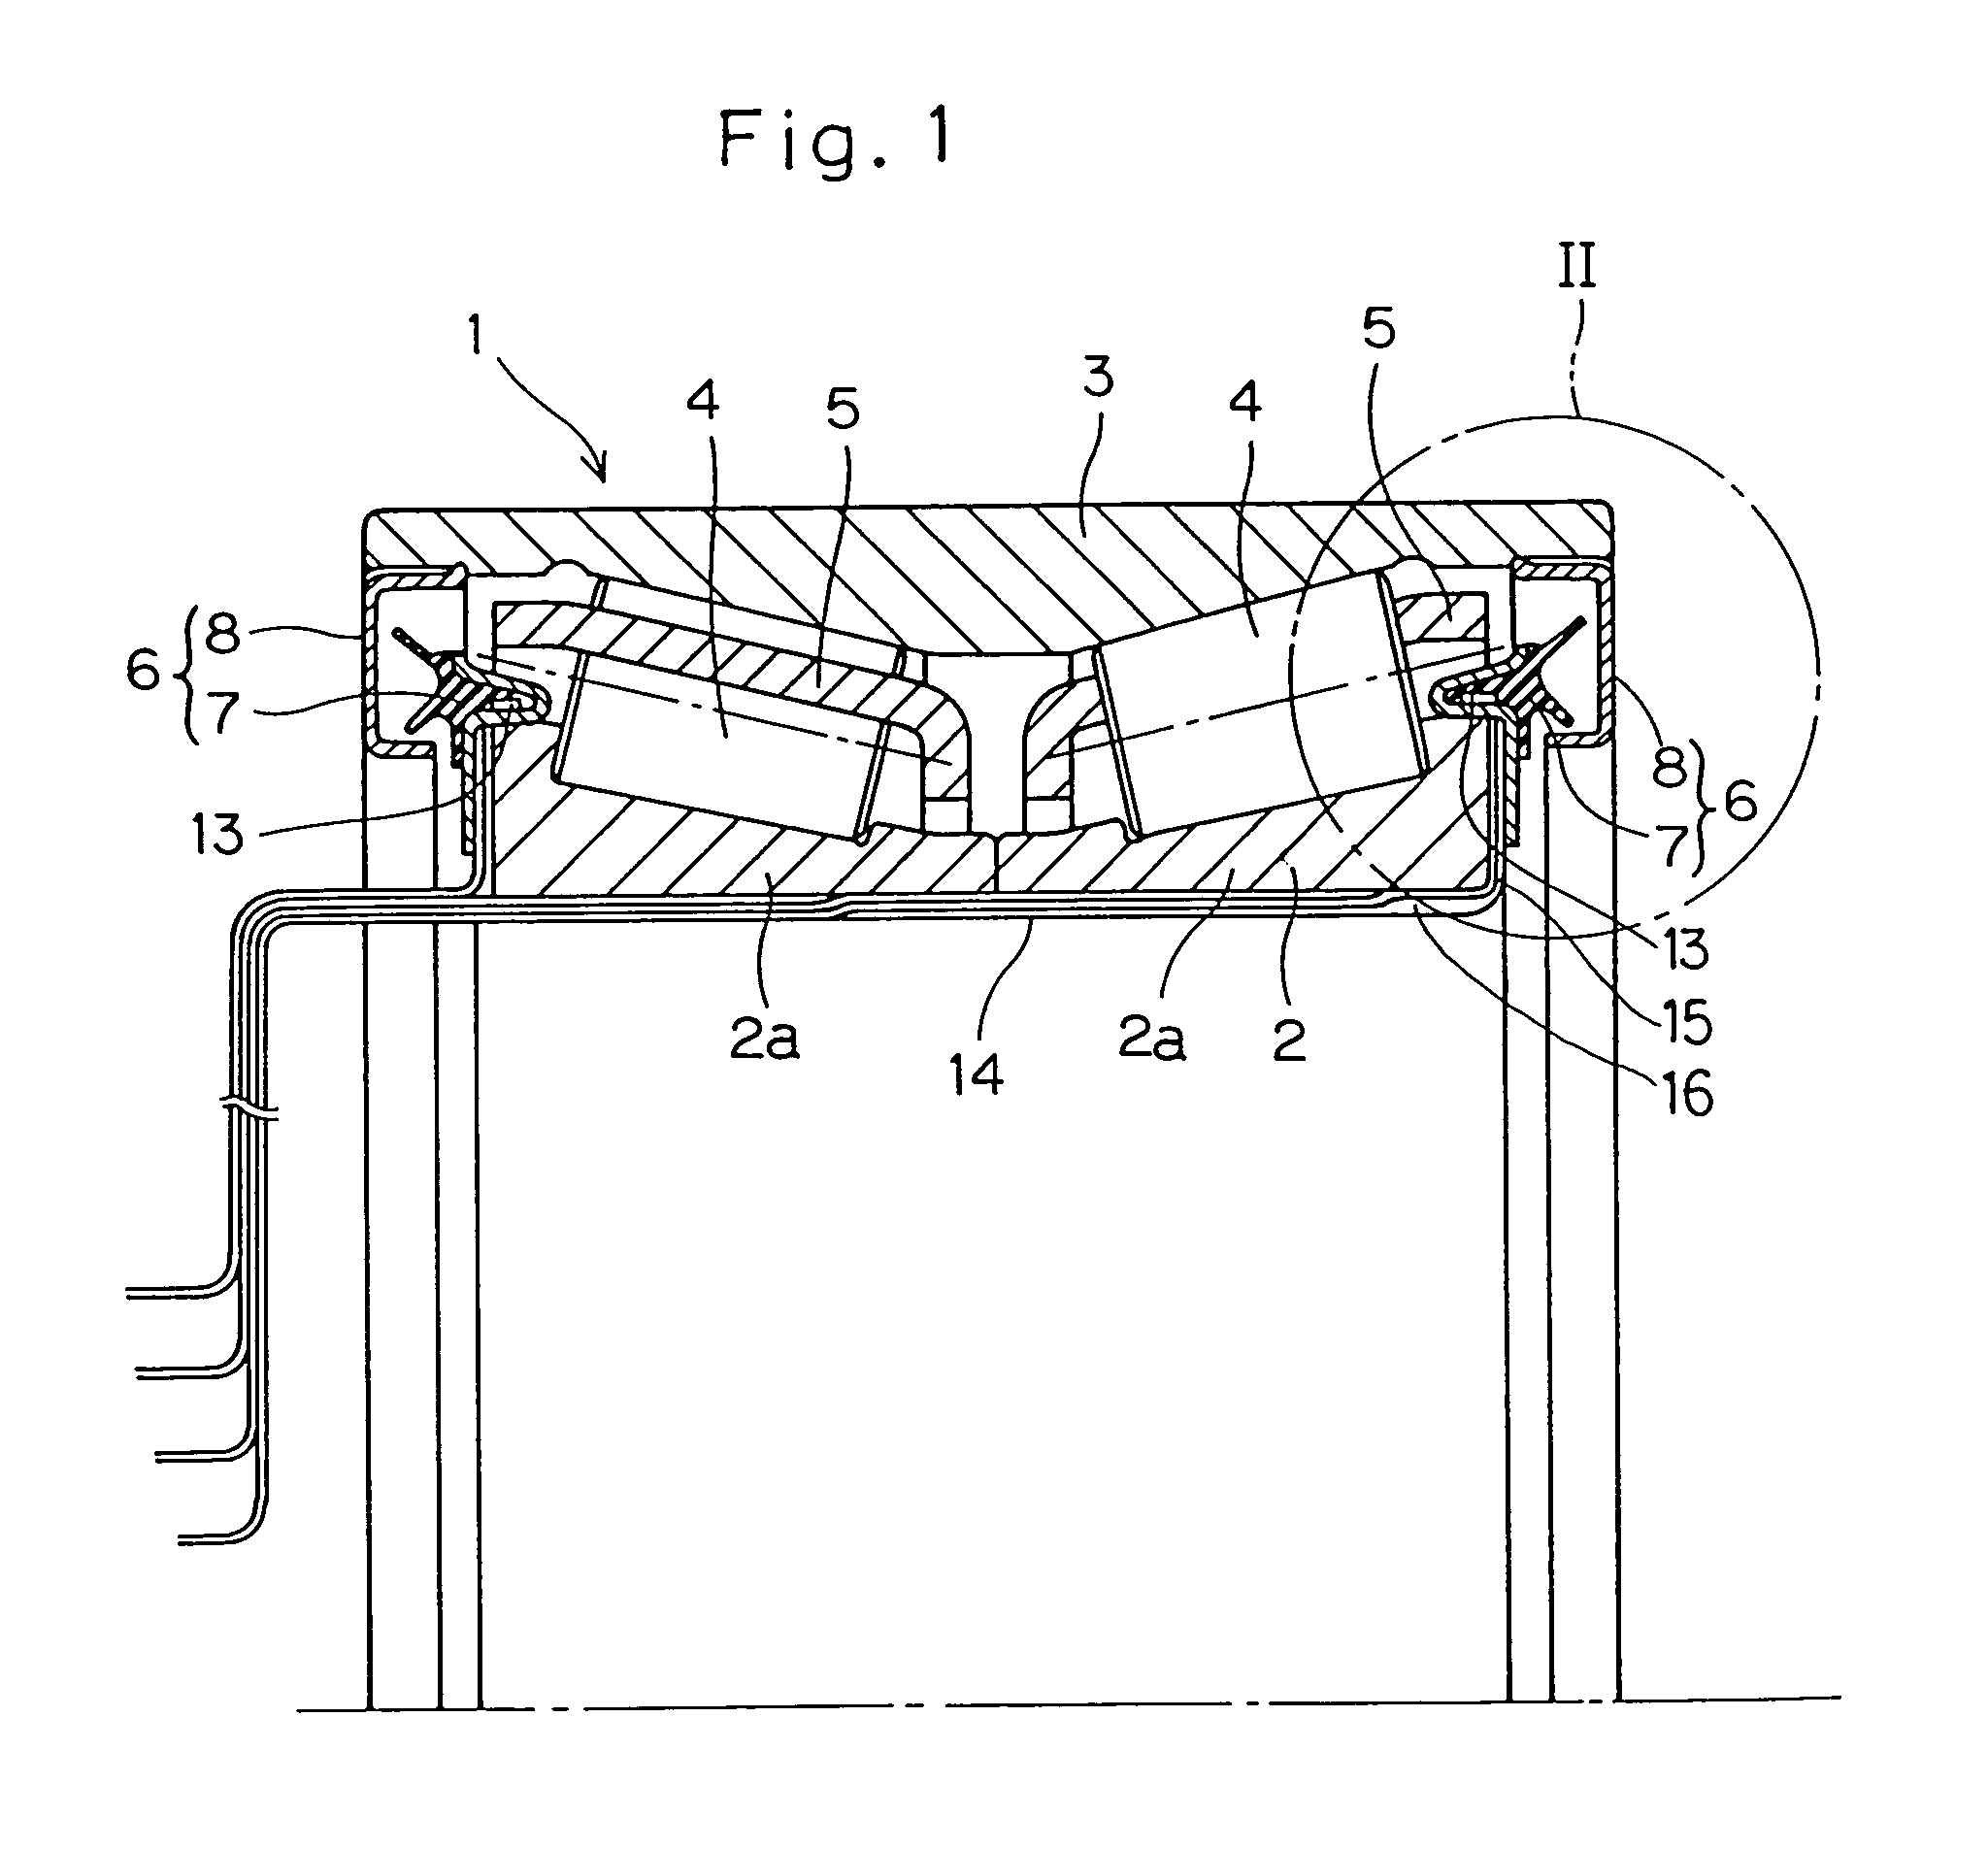 Bearing assembly with temperature sensor